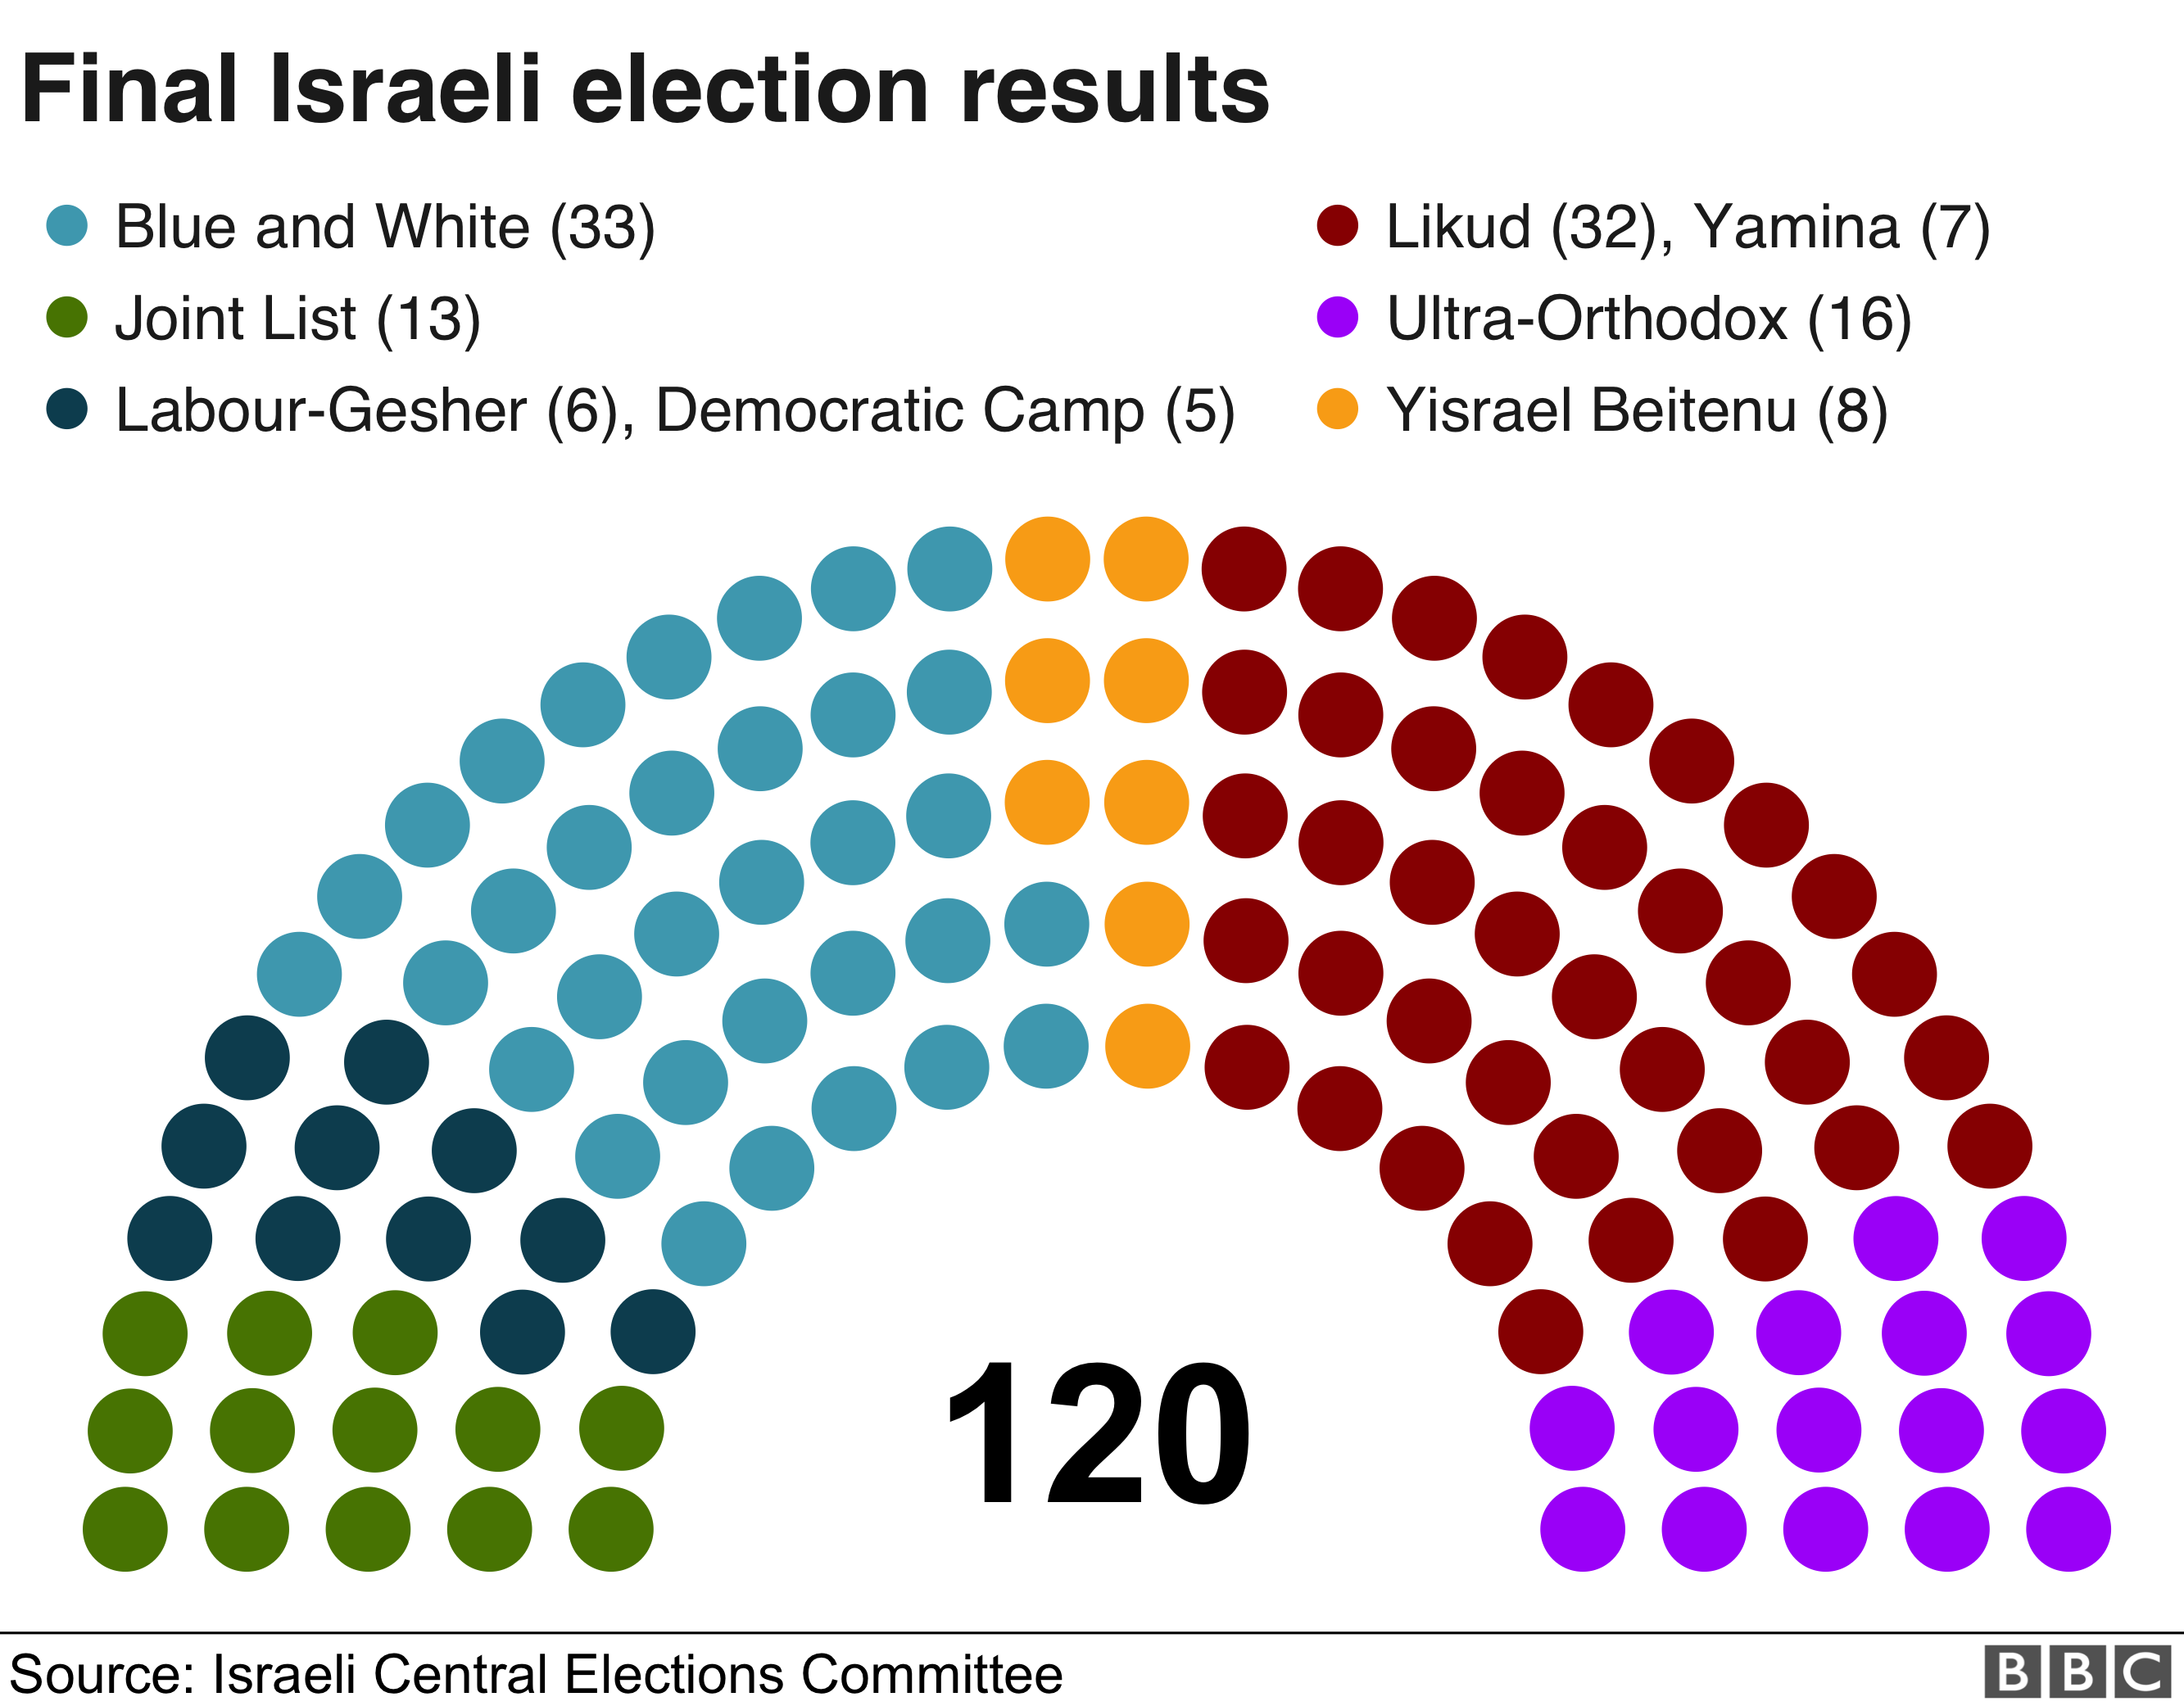 Final results from Israeli election 09/19